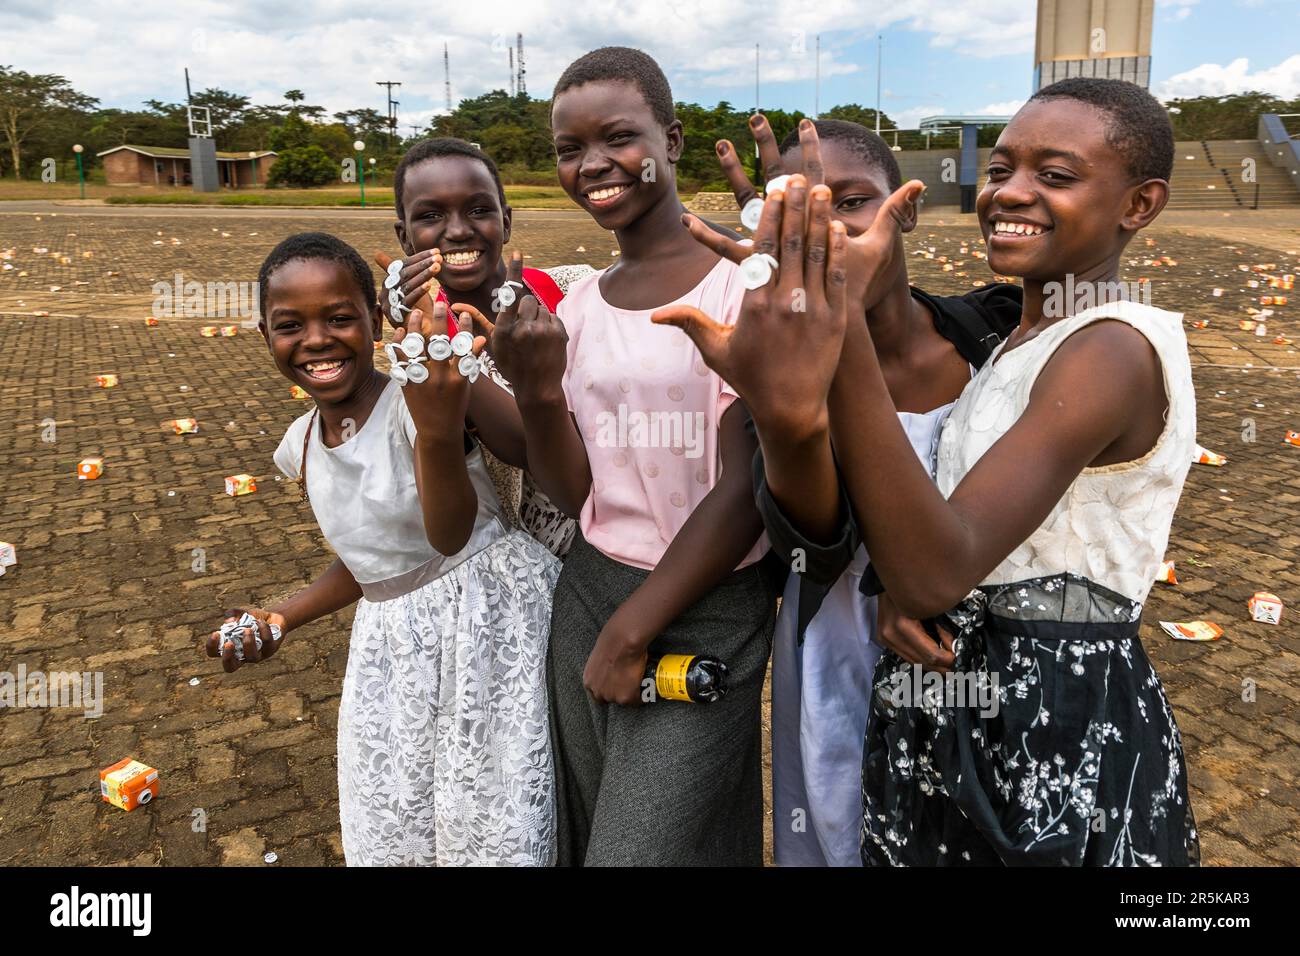 Posing with jewelry made of plastic. Here girls in front of the Memorial War Tower in Lilongwe after a public function. Young girls collect the cap rings of the maheu packs discarded on the national holiday in honor of Malawi's first president (Hastings Kamuzu Banda) to make jewelry. Maheu or Mahewu is a typical drink in Malawi made from fermented maize. Lilongwe, Malawi Stock Photo